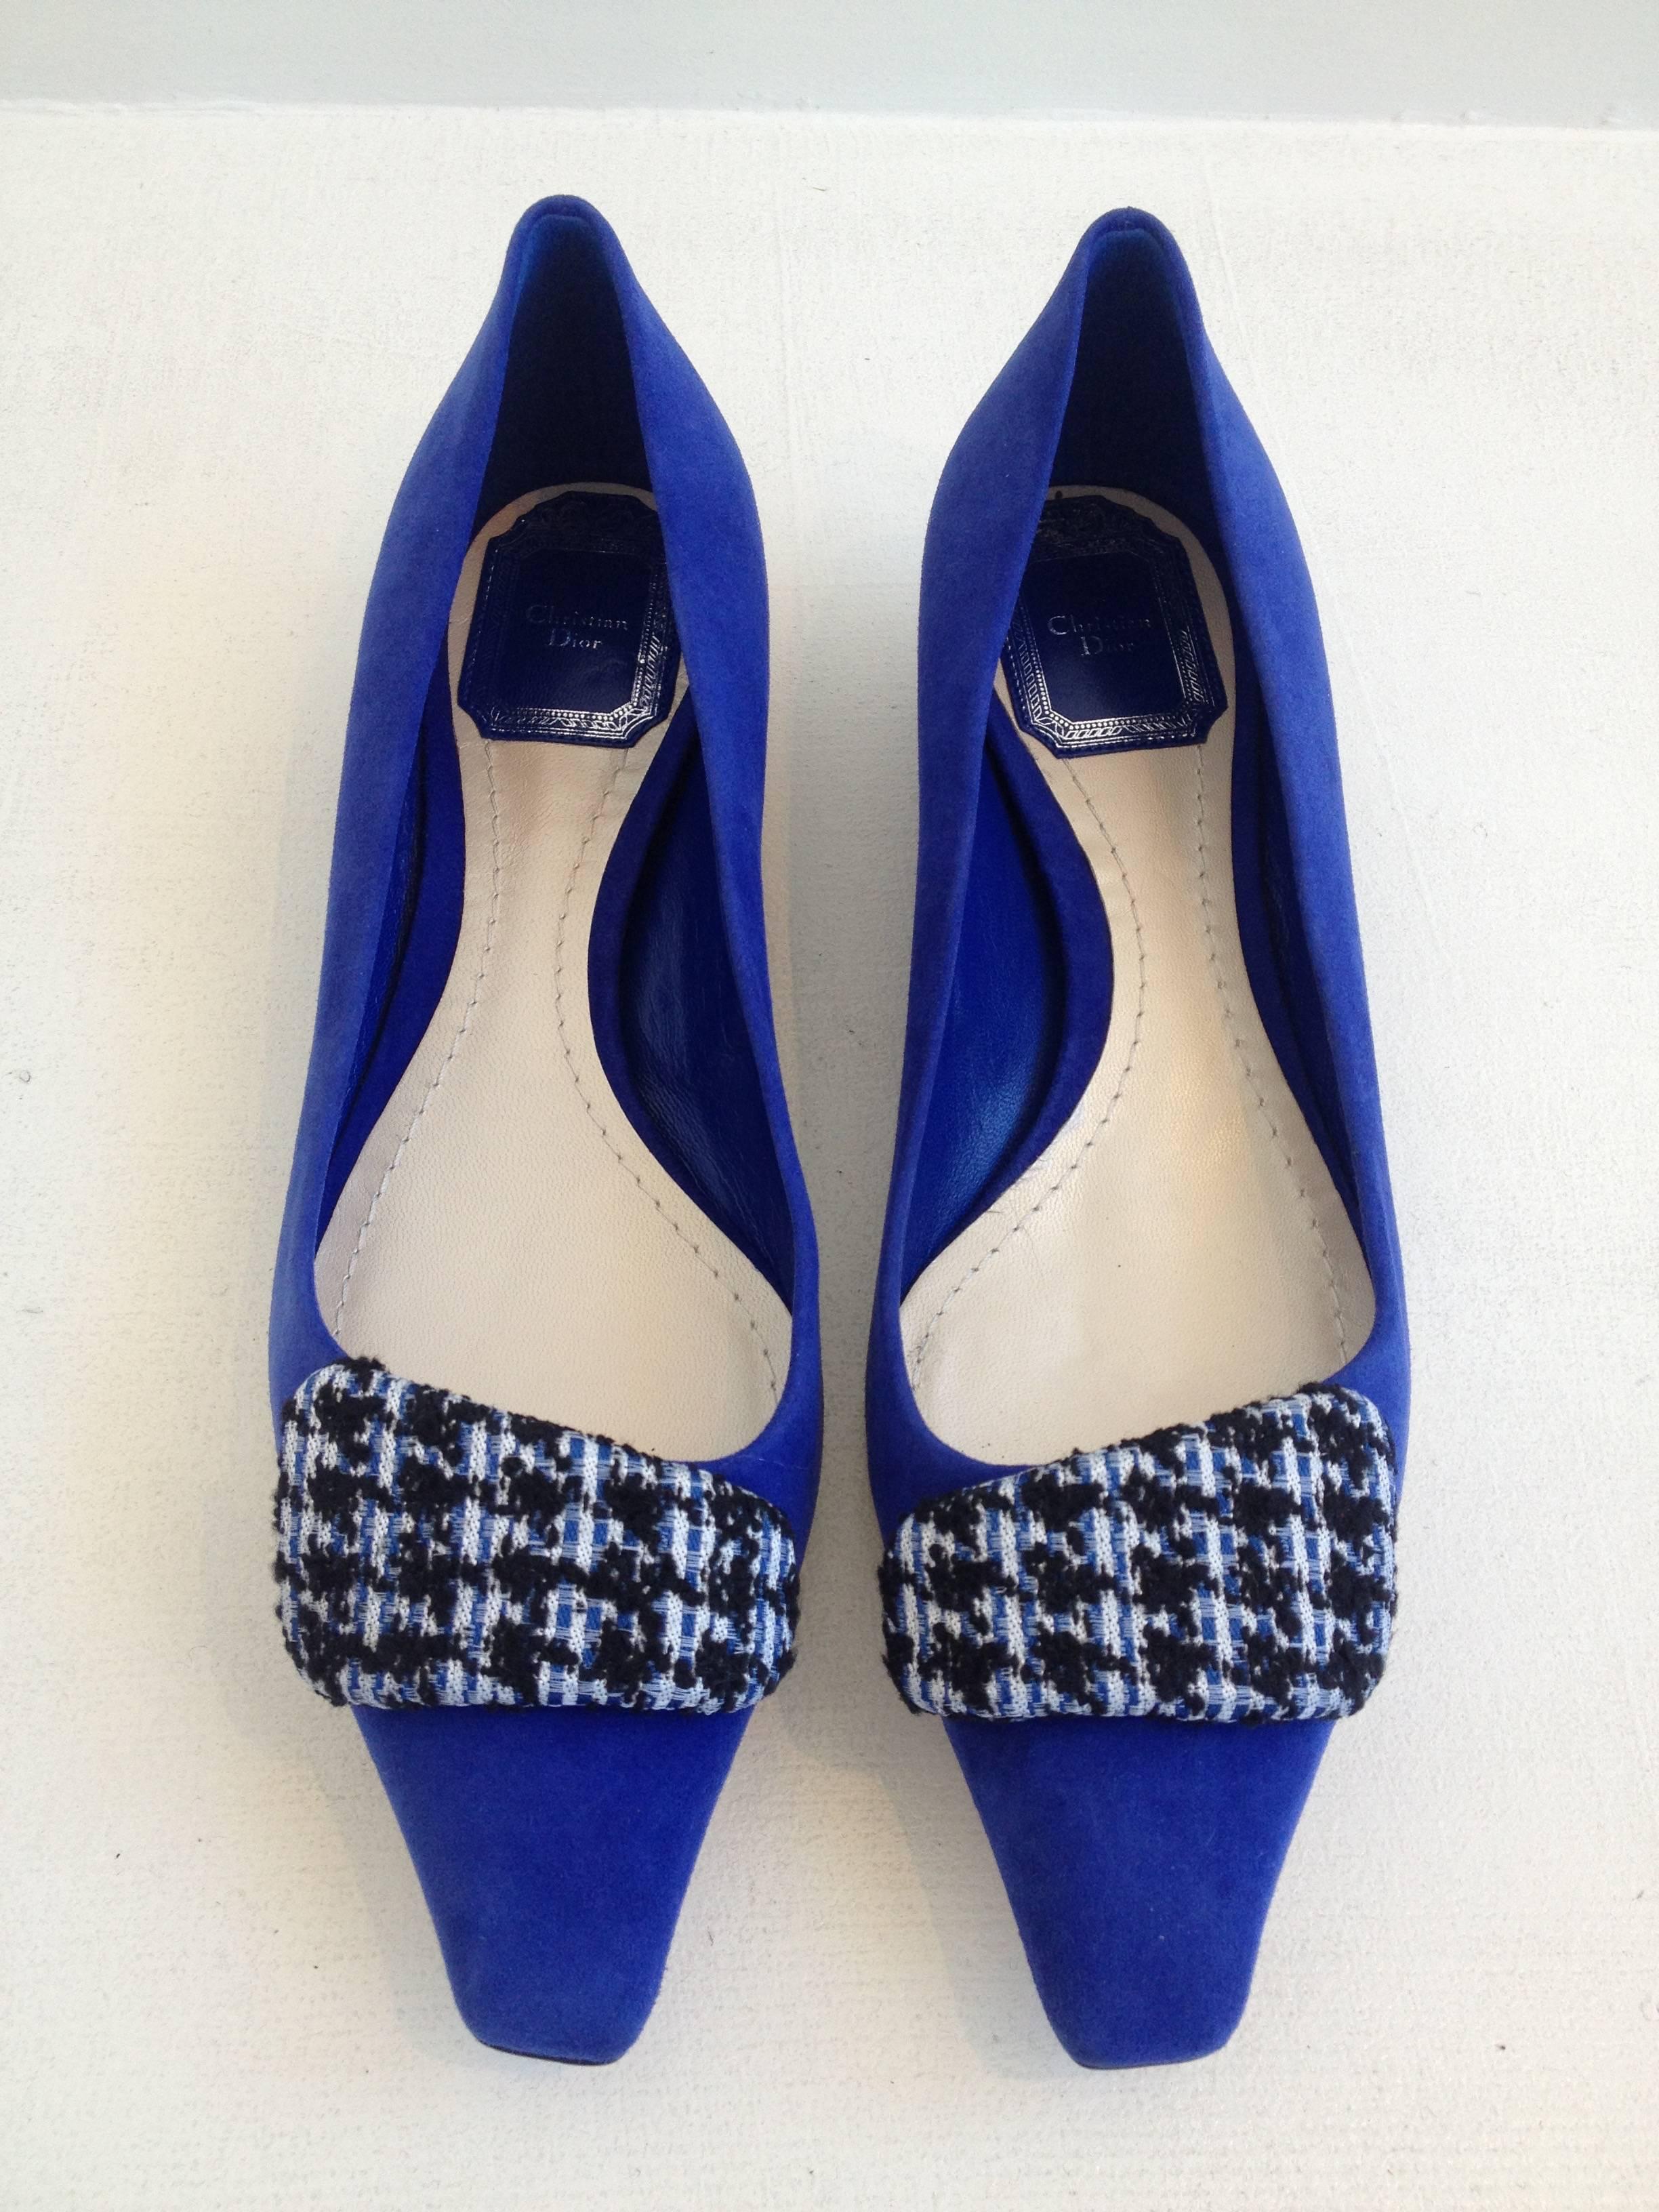 Channel the 1960s with these fabulous flats. Beautiful royal blue suede is embellished with a mod houndstooth tweed-covered shape on the toe, which is squared off for a feminine and retro look. The angled .75 inch heel adds a very Dior look,